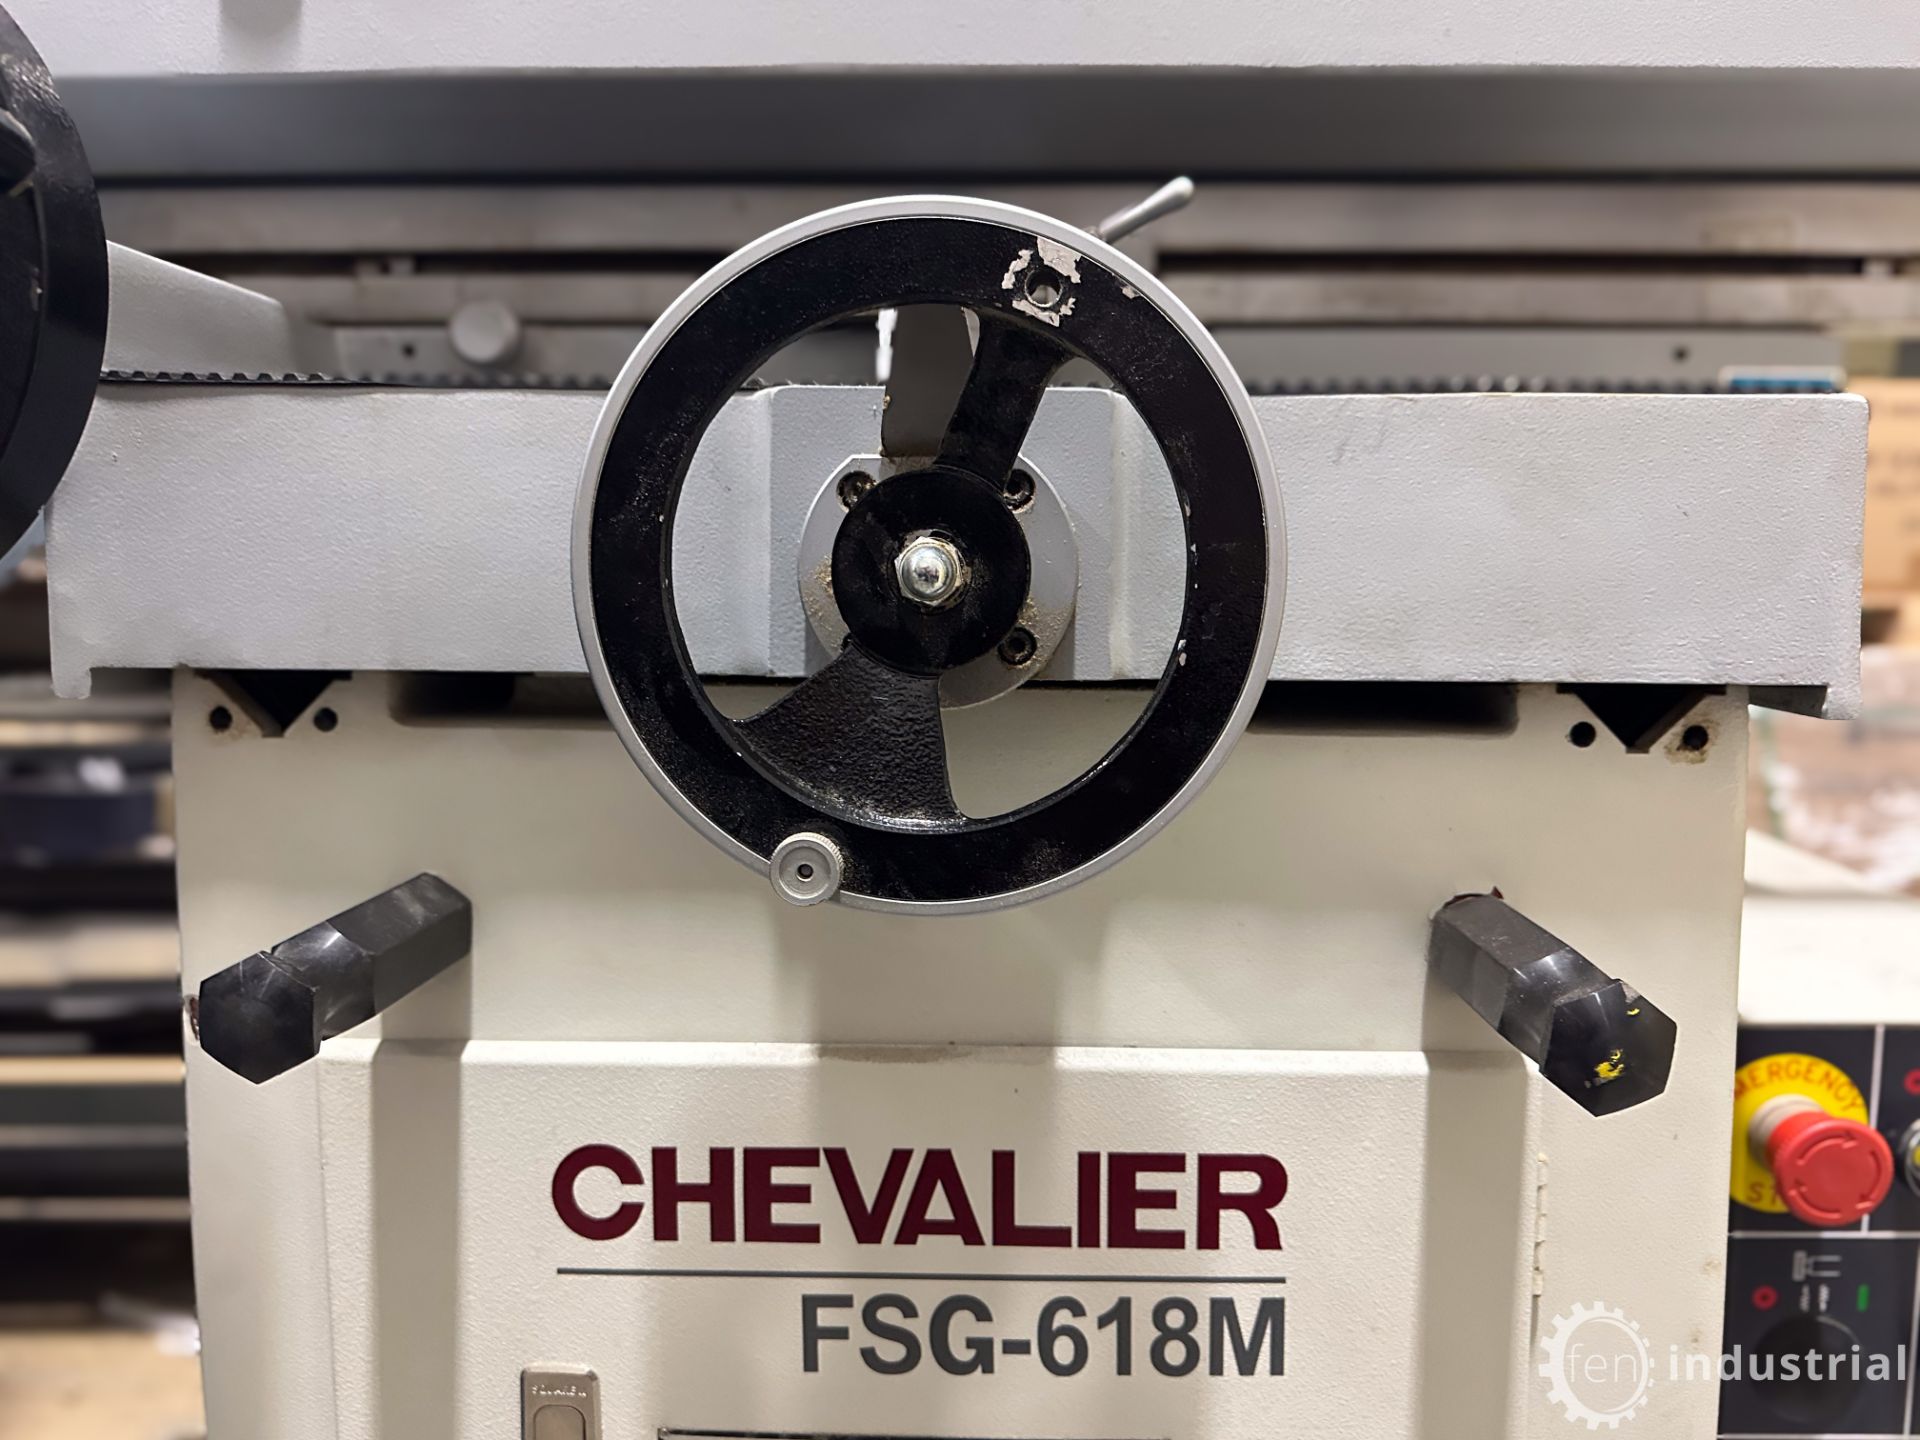 NEW / UNUSED CHEVALIER FSG-618M MANUAL SURFACE GRINDER, 6” X 18” MAGNETIC CHUCK, S/N FA3185015 ( - Image 8 of 39